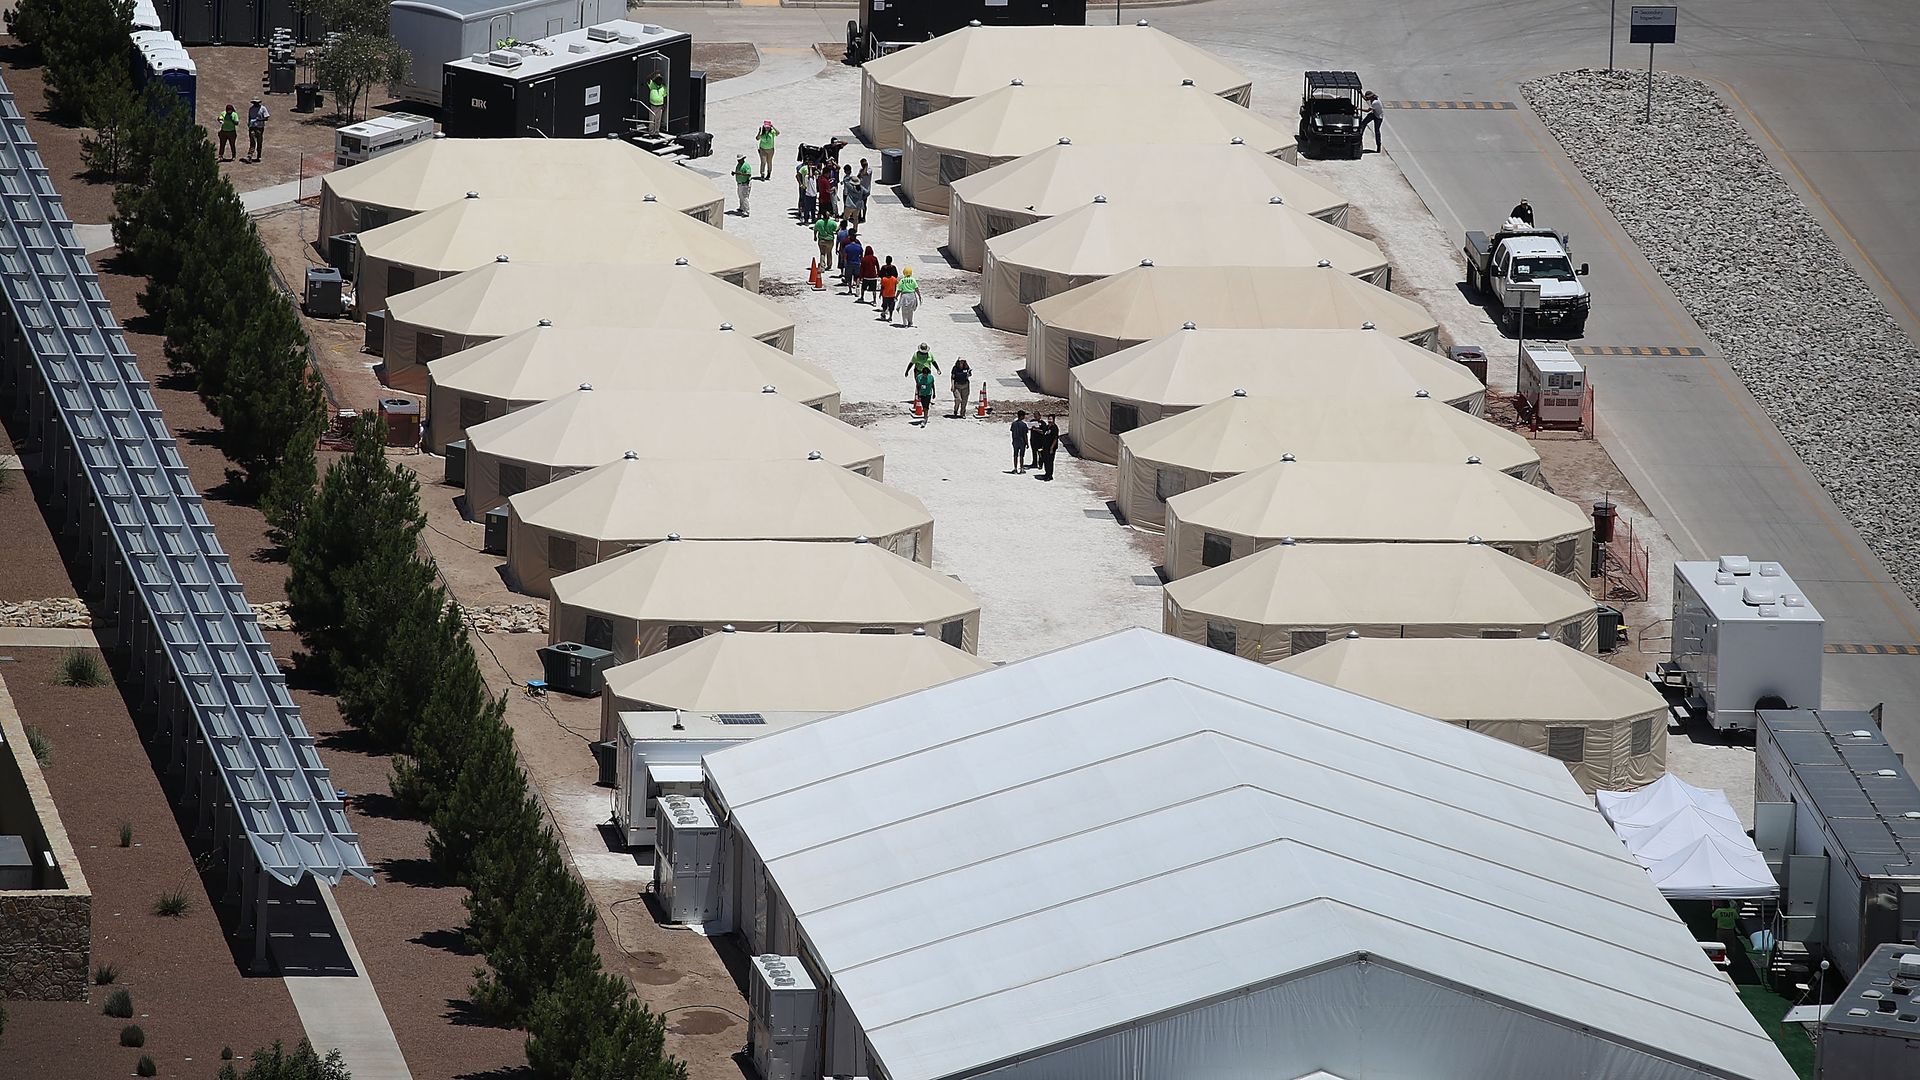 A detention camp for immigrant children in Tornillo, Texas